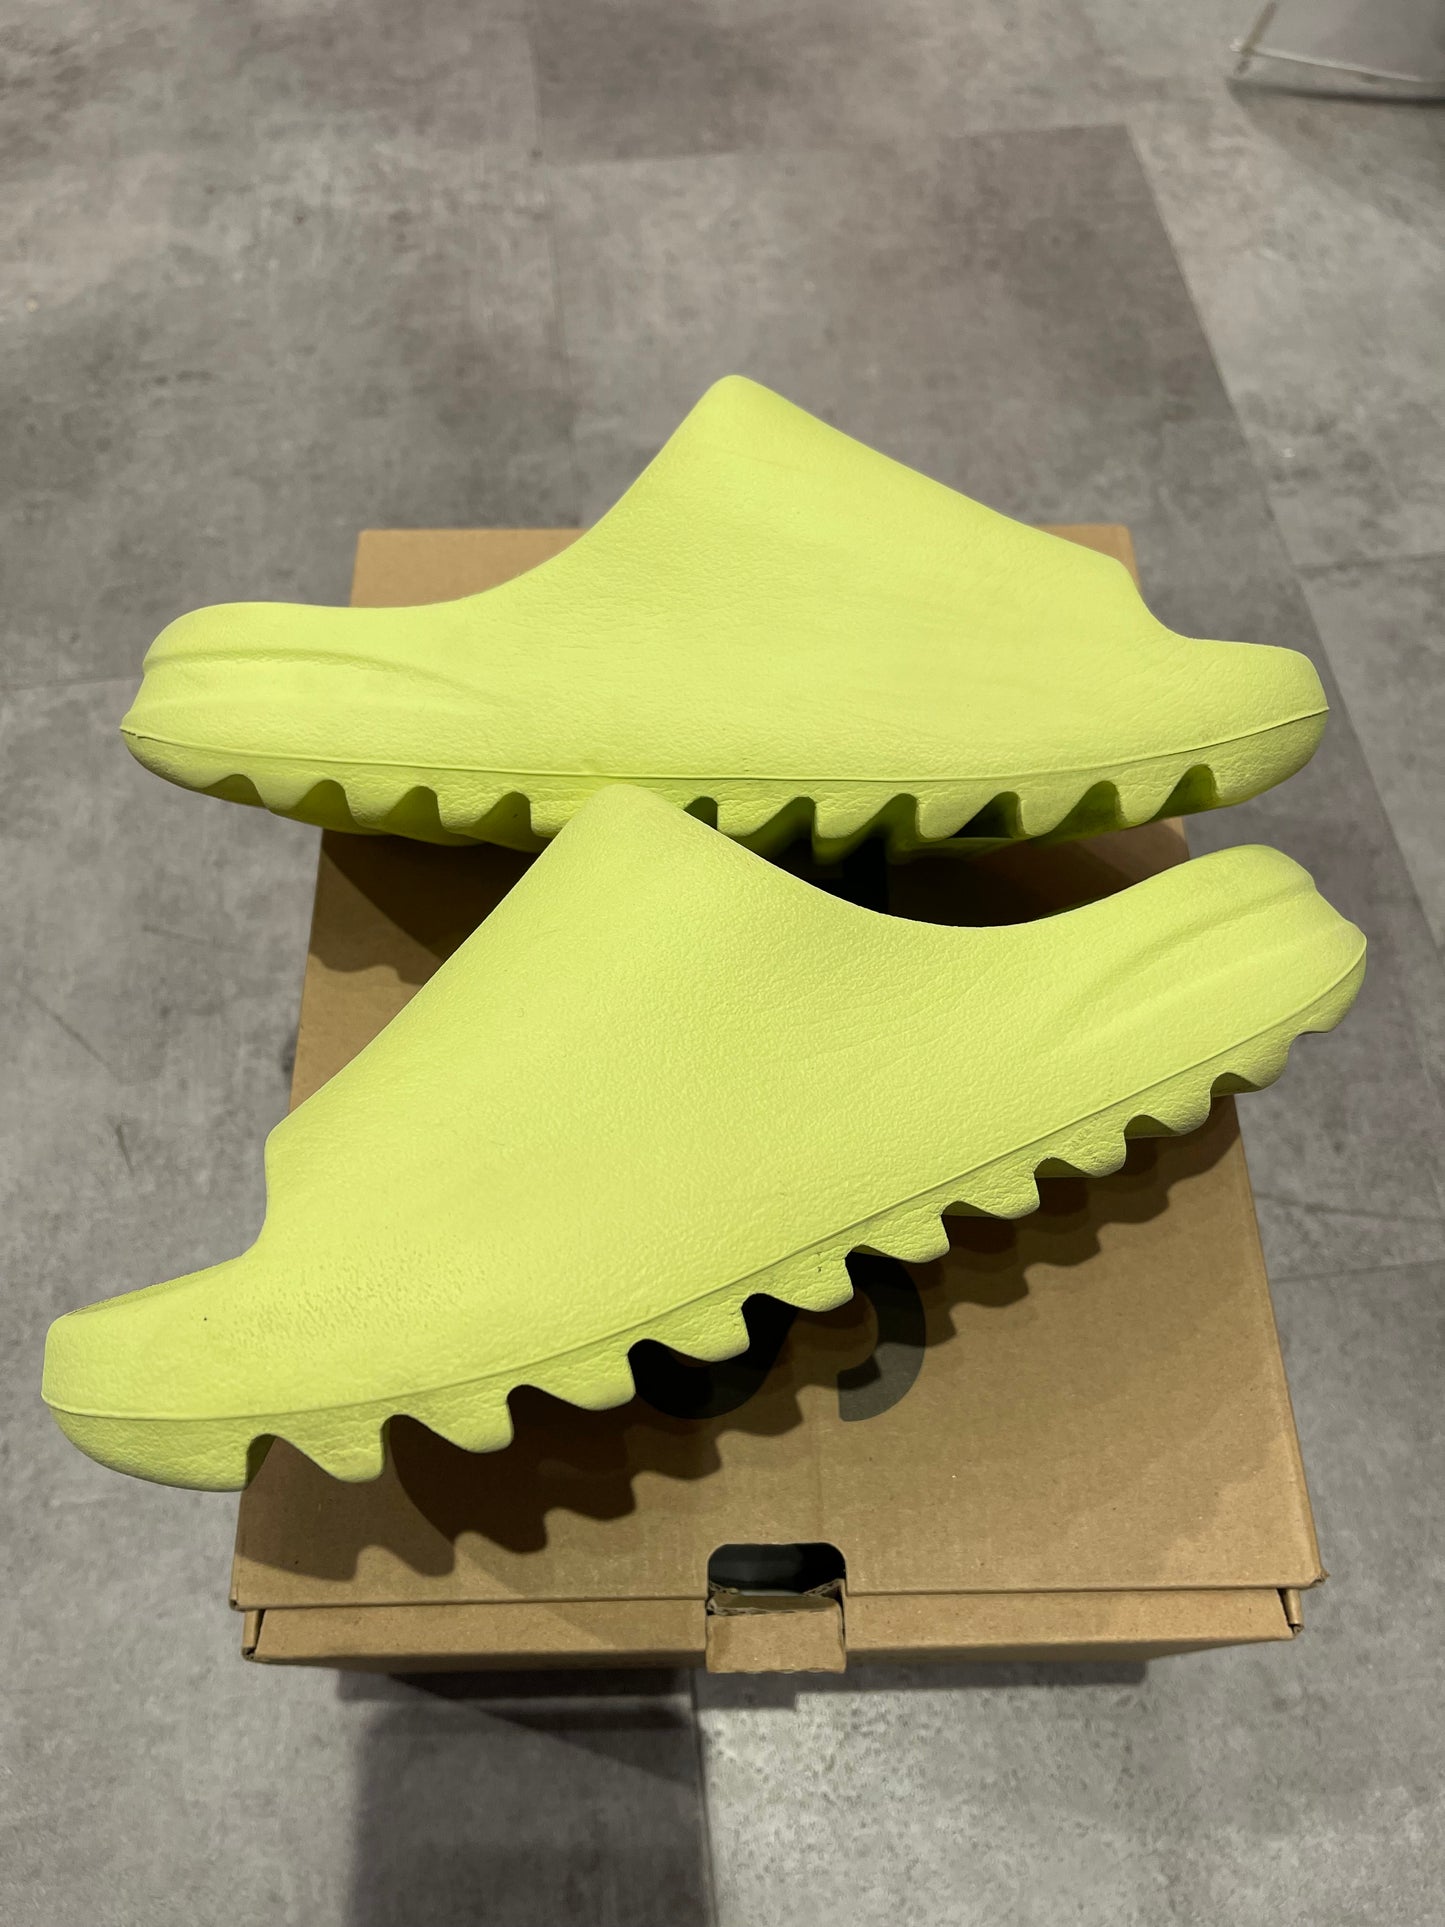 Adidas Yeezy Slide Green Glow (Preowned Size 7)